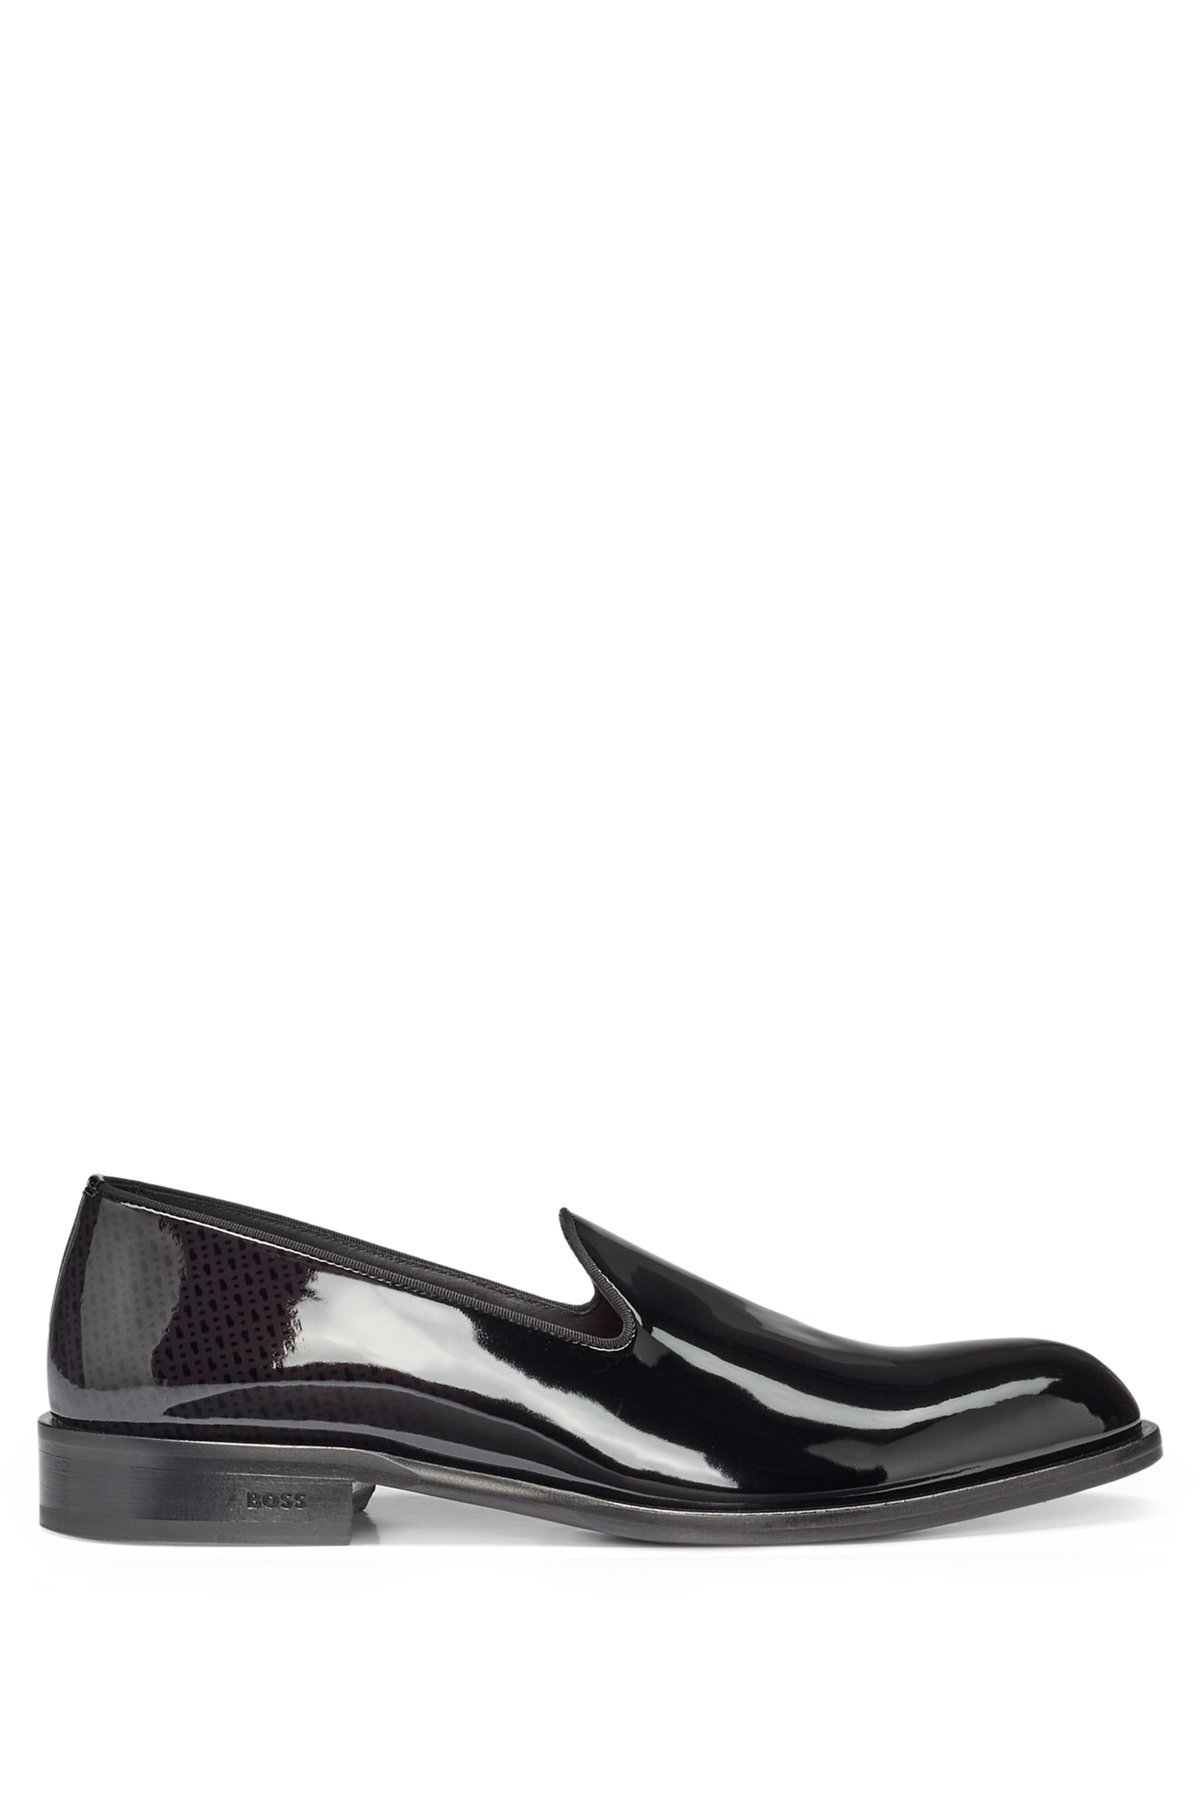 Italian-made loafers in leather with degradé monogram detailing, Black